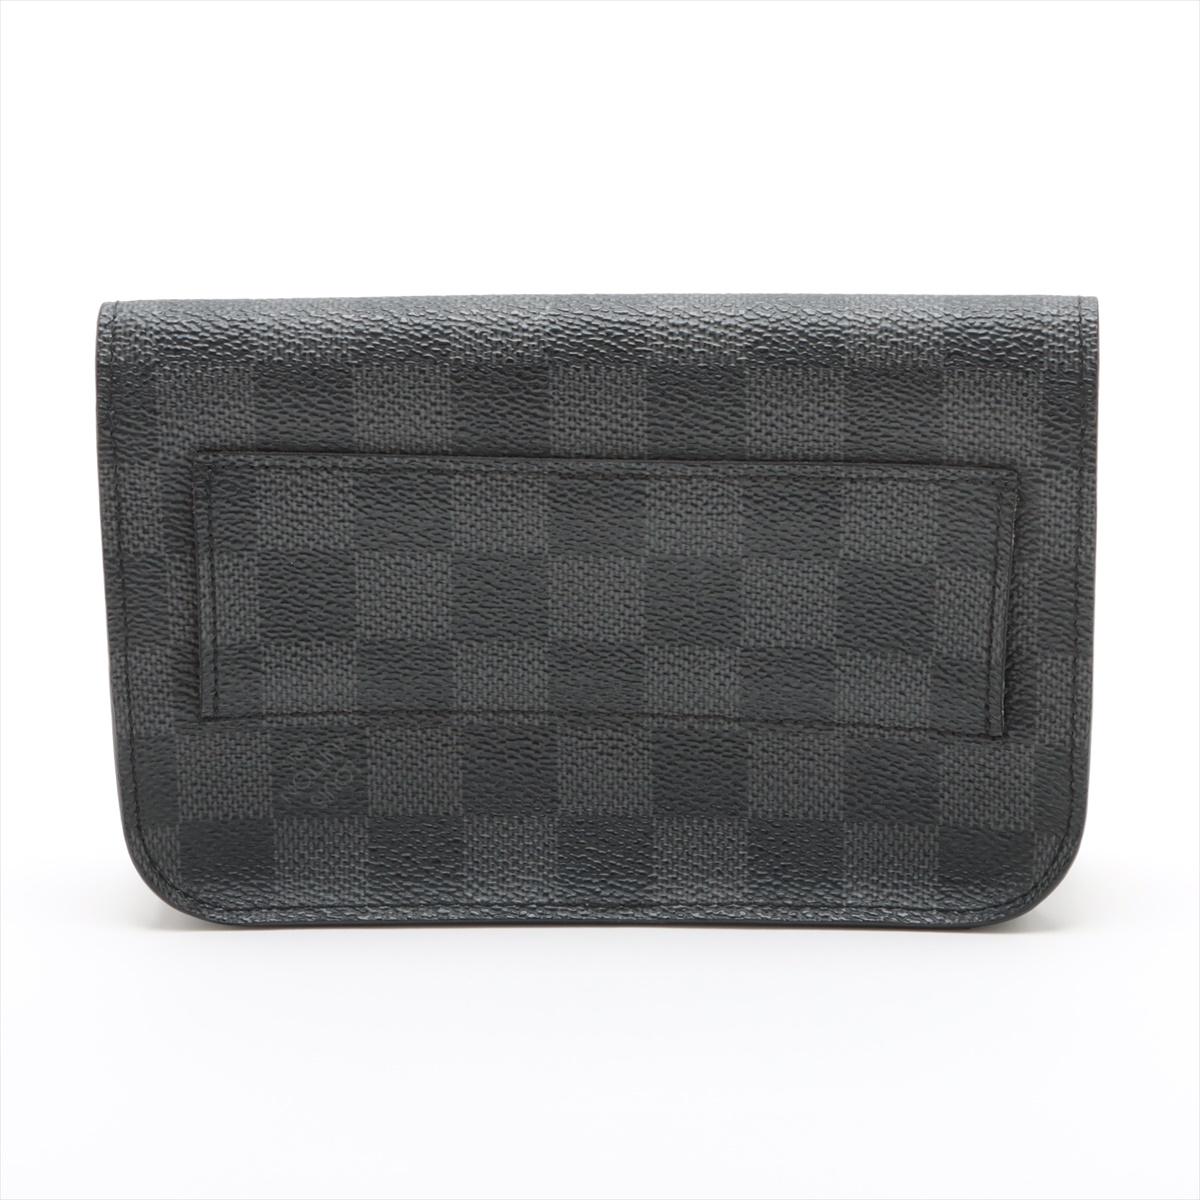 Louis Vuitton Damier Graphite Pochette Homme In Good Condition For Sale In Indianapolis, IN